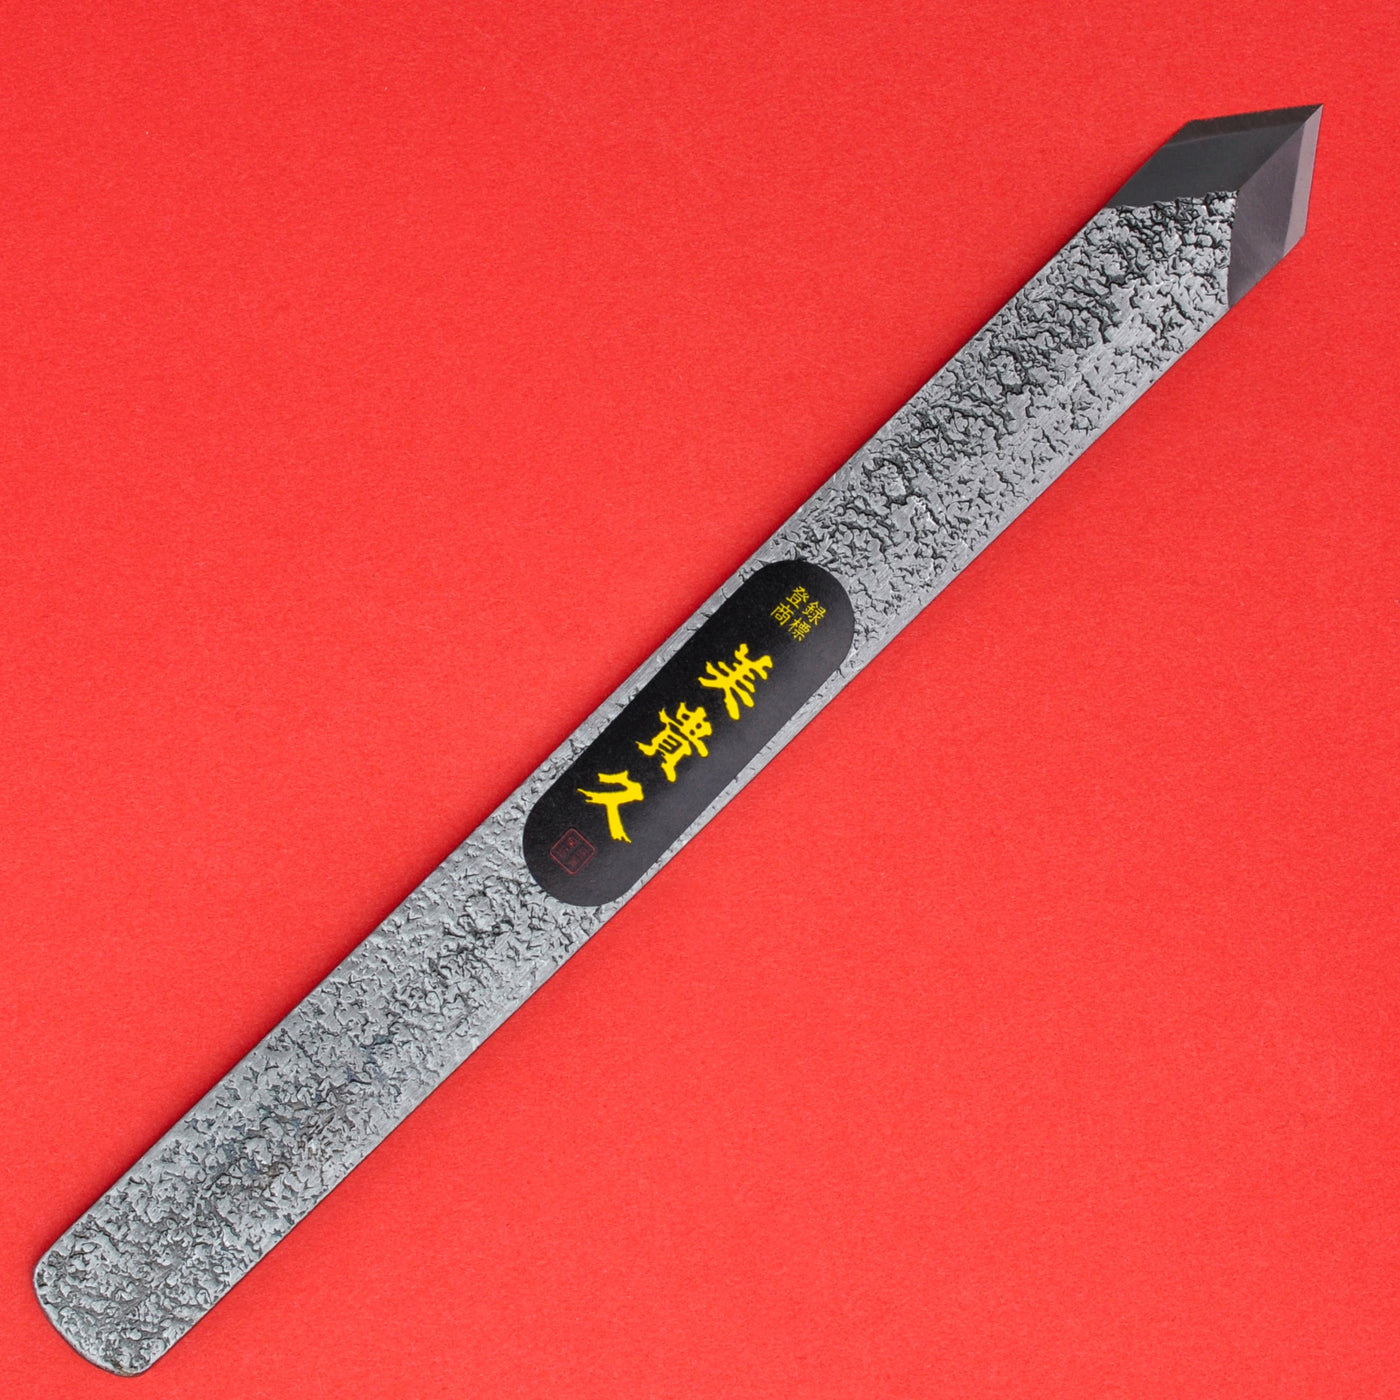 Japanese Marking Knives - A Brief Introduction 